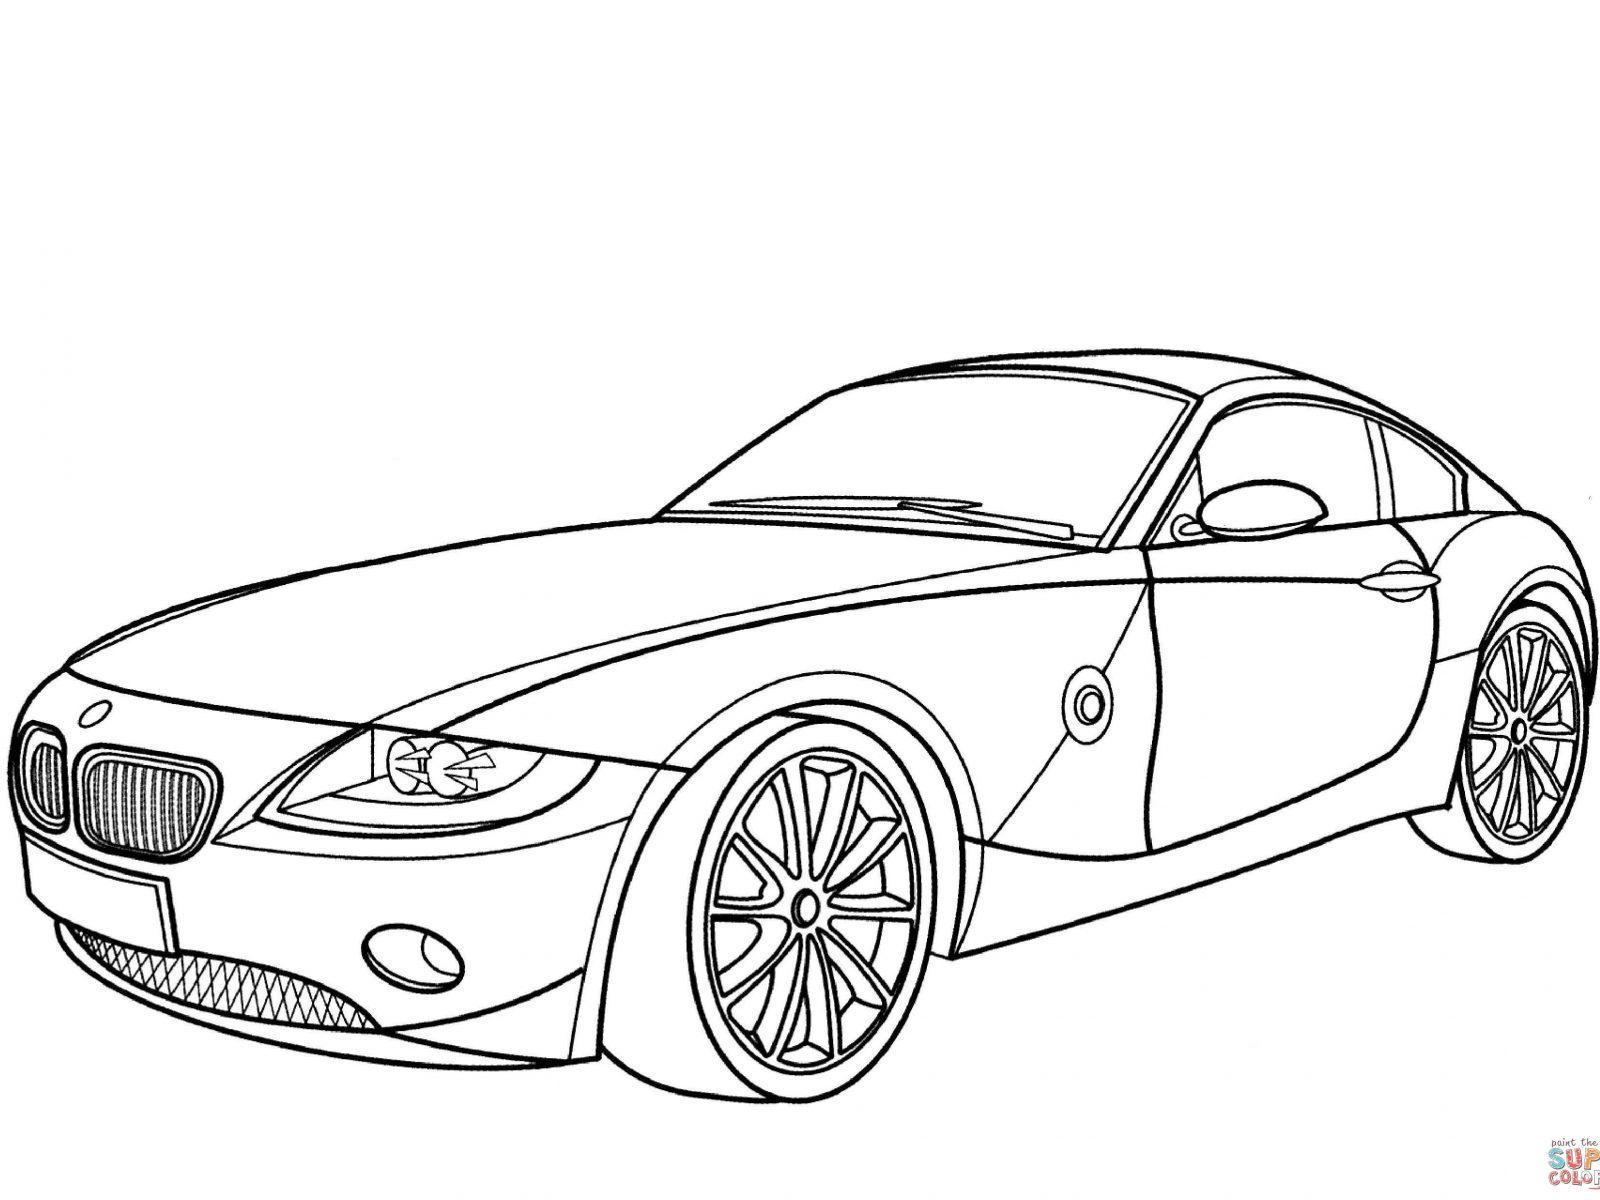 Bmw Car Coloring Pages at GetDrawings  Free download